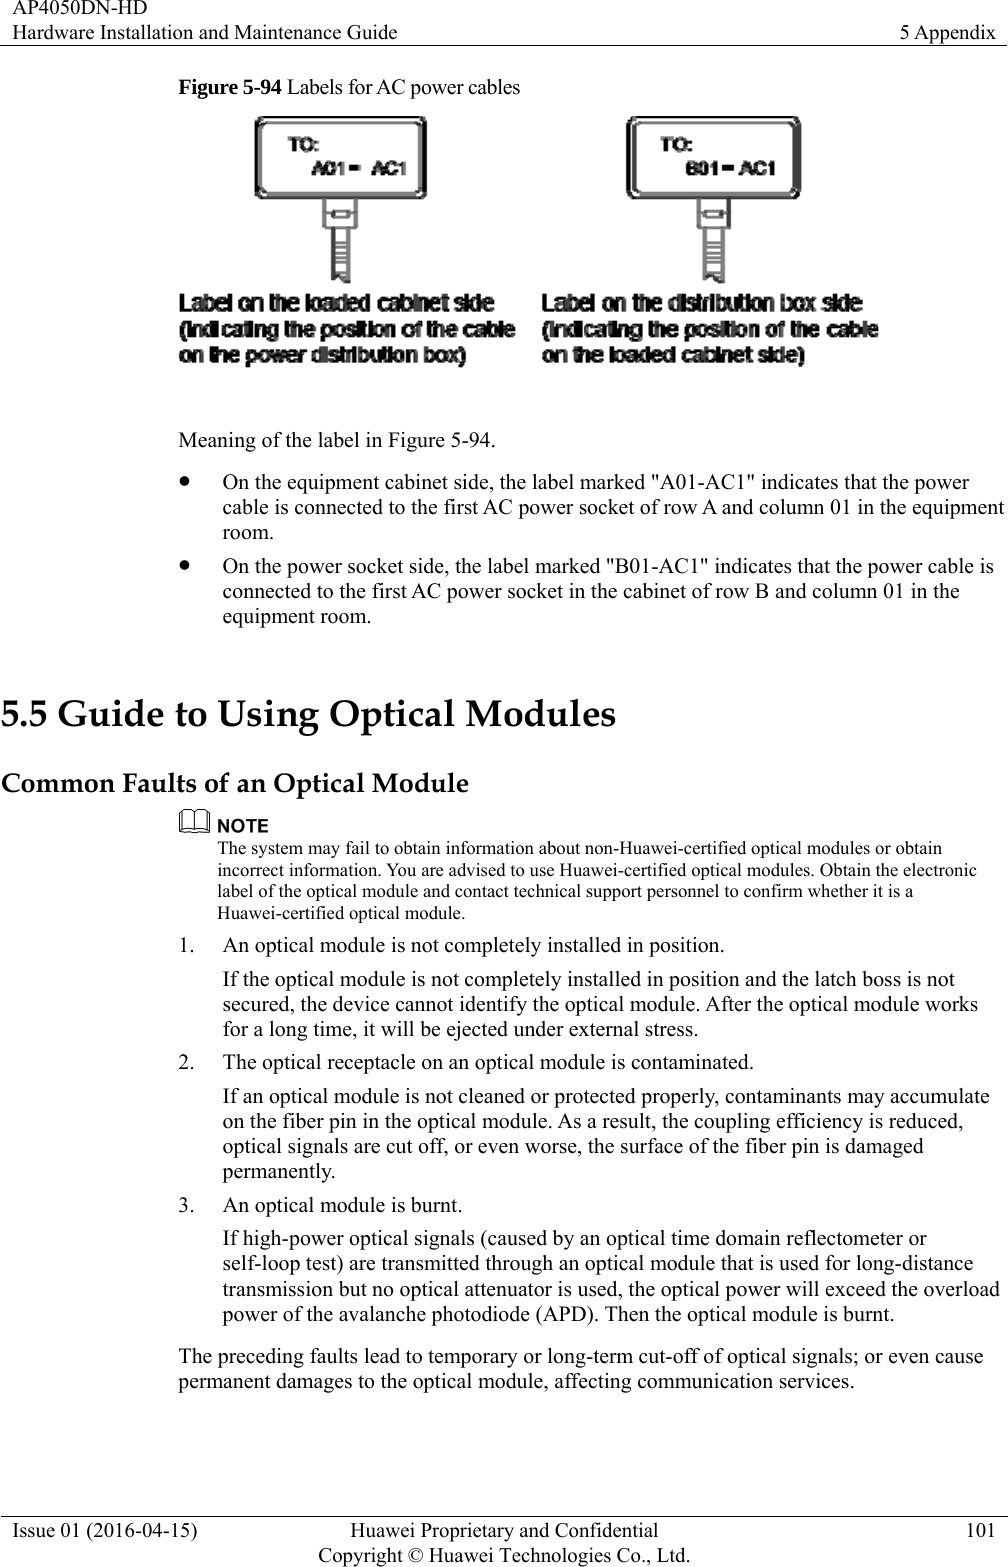 AP4050DN-HD Hardware Installation and Maintenance Guide  5 Appendix Issue 01 (2016-04-15)  Huawei Proprietary and Confidential         Copyright © Huawei Technologies Co., Ltd.101 Figure 5-94 Labels for AC power cables   Meaning of the label in Figure 5-94.  On the equipment cabinet side, the label marked &quot;A01-AC1&quot; indicates that the power cable is connected to the first AC power socket of row A and column 01 in the equipment room.  On the power socket side, the label marked &quot;B01-AC1&quot; indicates that the power cable is connected to the first AC power socket in the cabinet of row B and column 01 in the equipment room. 5.5 Guide to Using Optical Modules Common Faults of an Optical Module  The system may fail to obtain information about non-Huawei-certified optical modules or obtain incorrect information. You are advised to use Huawei-certified optical modules. Obtain the electronic label of the optical module and contact technical support personnel to confirm whether it is a Huawei-certified optical module. 1. An optical module is not completely installed in position. If the optical module is not completely installed in position and the latch boss is not secured, the device cannot identify the optical module. After the optical module works for a long time, it will be ejected under external stress. 2. The optical receptacle on an optical module is contaminated. If an optical module is not cleaned or protected properly, contaminants may accumulate on the fiber pin in the optical module. As a result, the coupling efficiency is reduced, optical signals are cut off, or even worse, the surface of the fiber pin is damaged permanently. 3. An optical module is burnt. If high-power optical signals (caused by an optical time domain reflectometer or self-loop test) are transmitted through an optical module that is used for long-distance transmission but no optical attenuator is used, the optical power will exceed the overload power of the avalanche photodiode (APD). Then the optical module is burnt. The preceding faults lead to temporary or long-term cut-off of optical signals; or even cause permanent damages to the optical module, affecting communication services. 